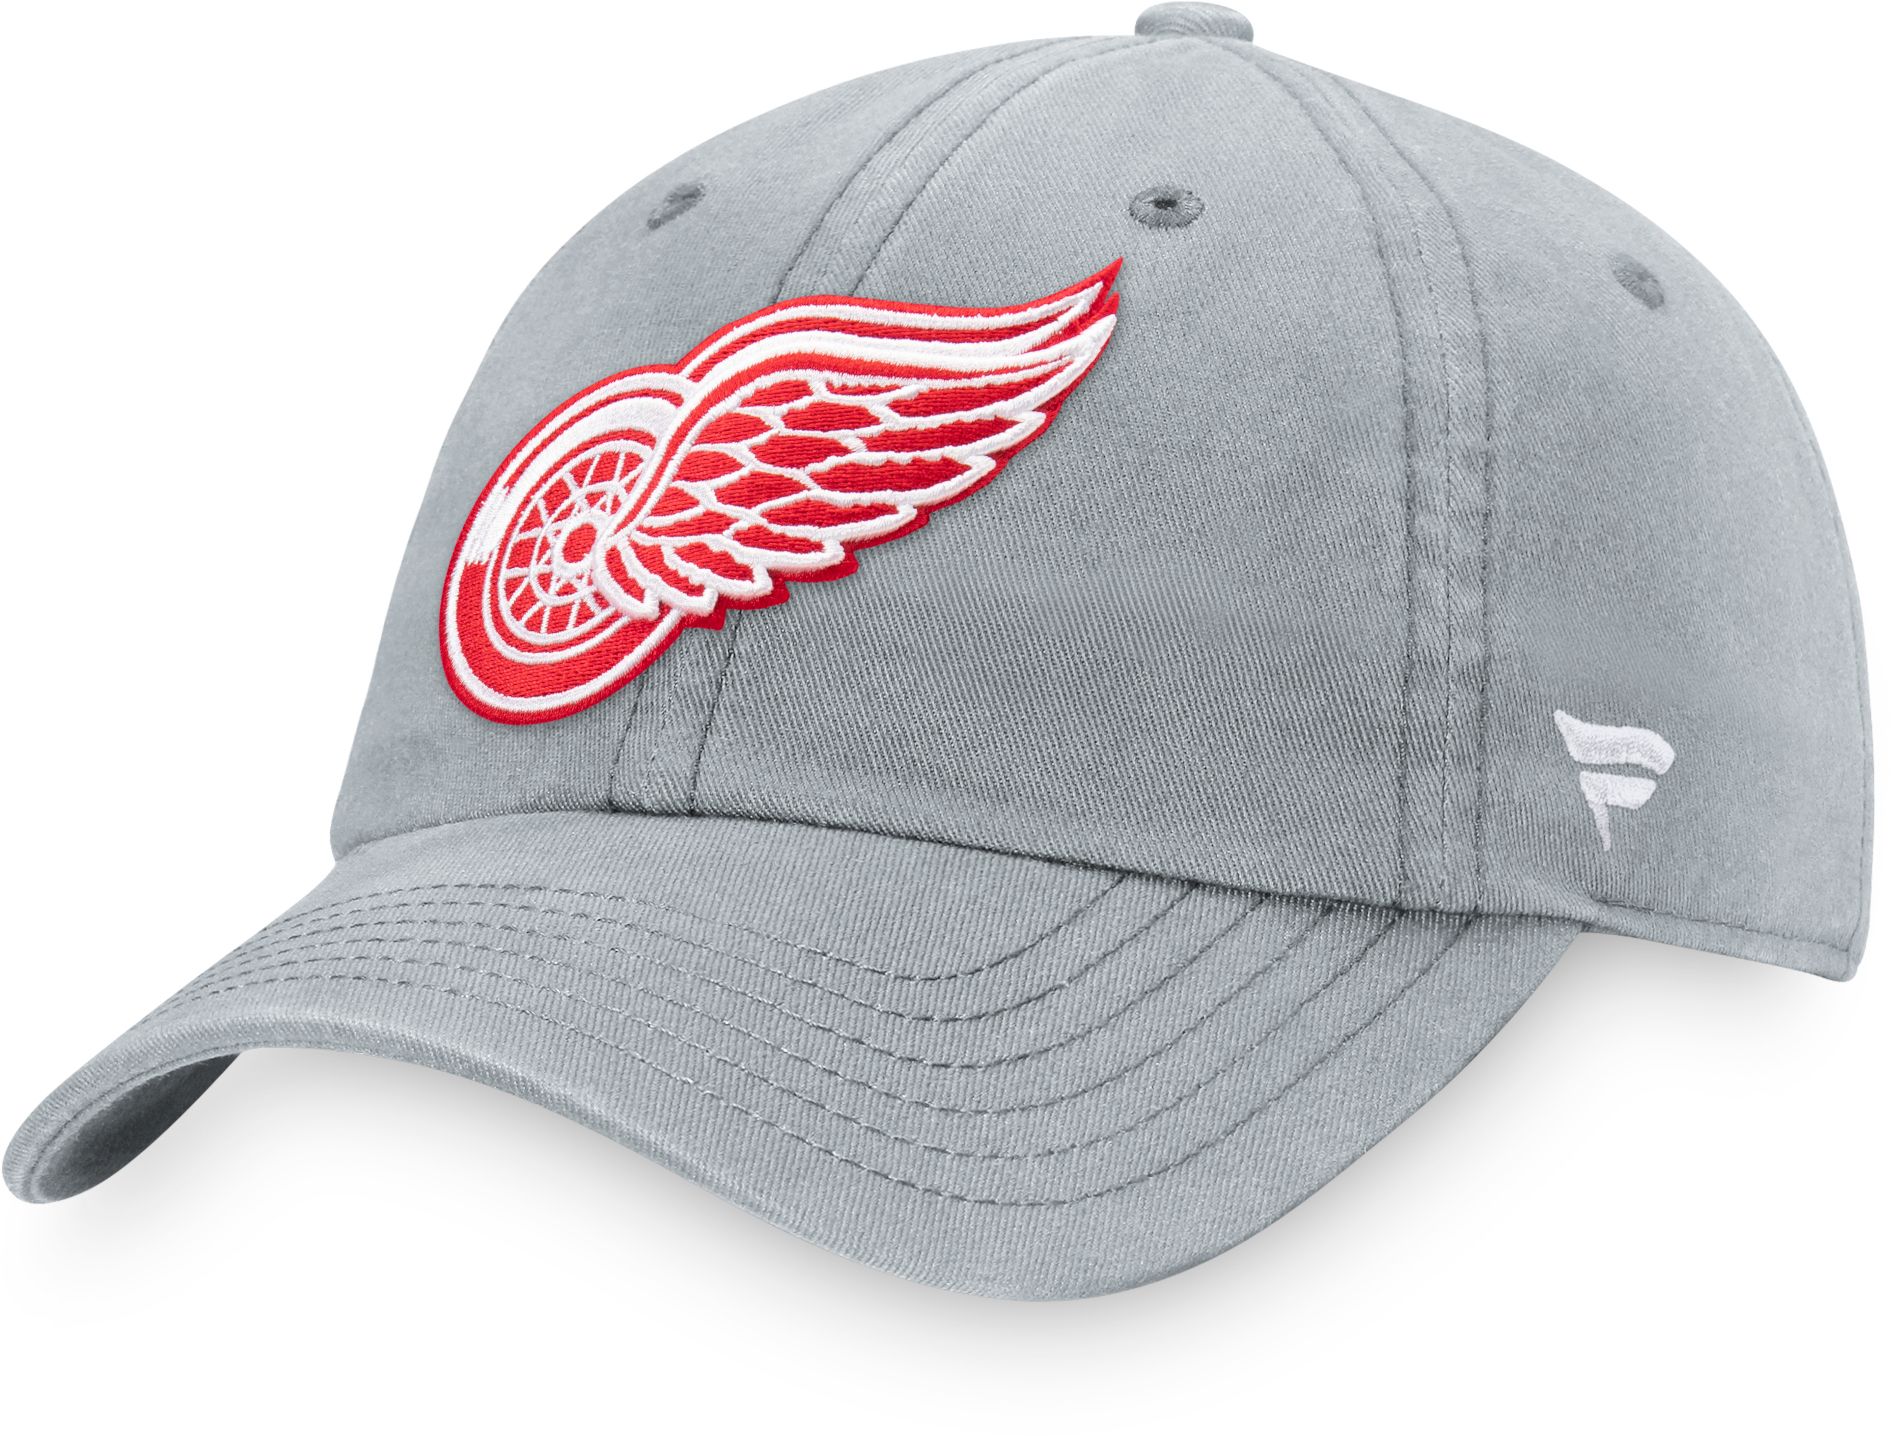 Detroit Red Wings Fanatics Branded Authentic Pro Performance